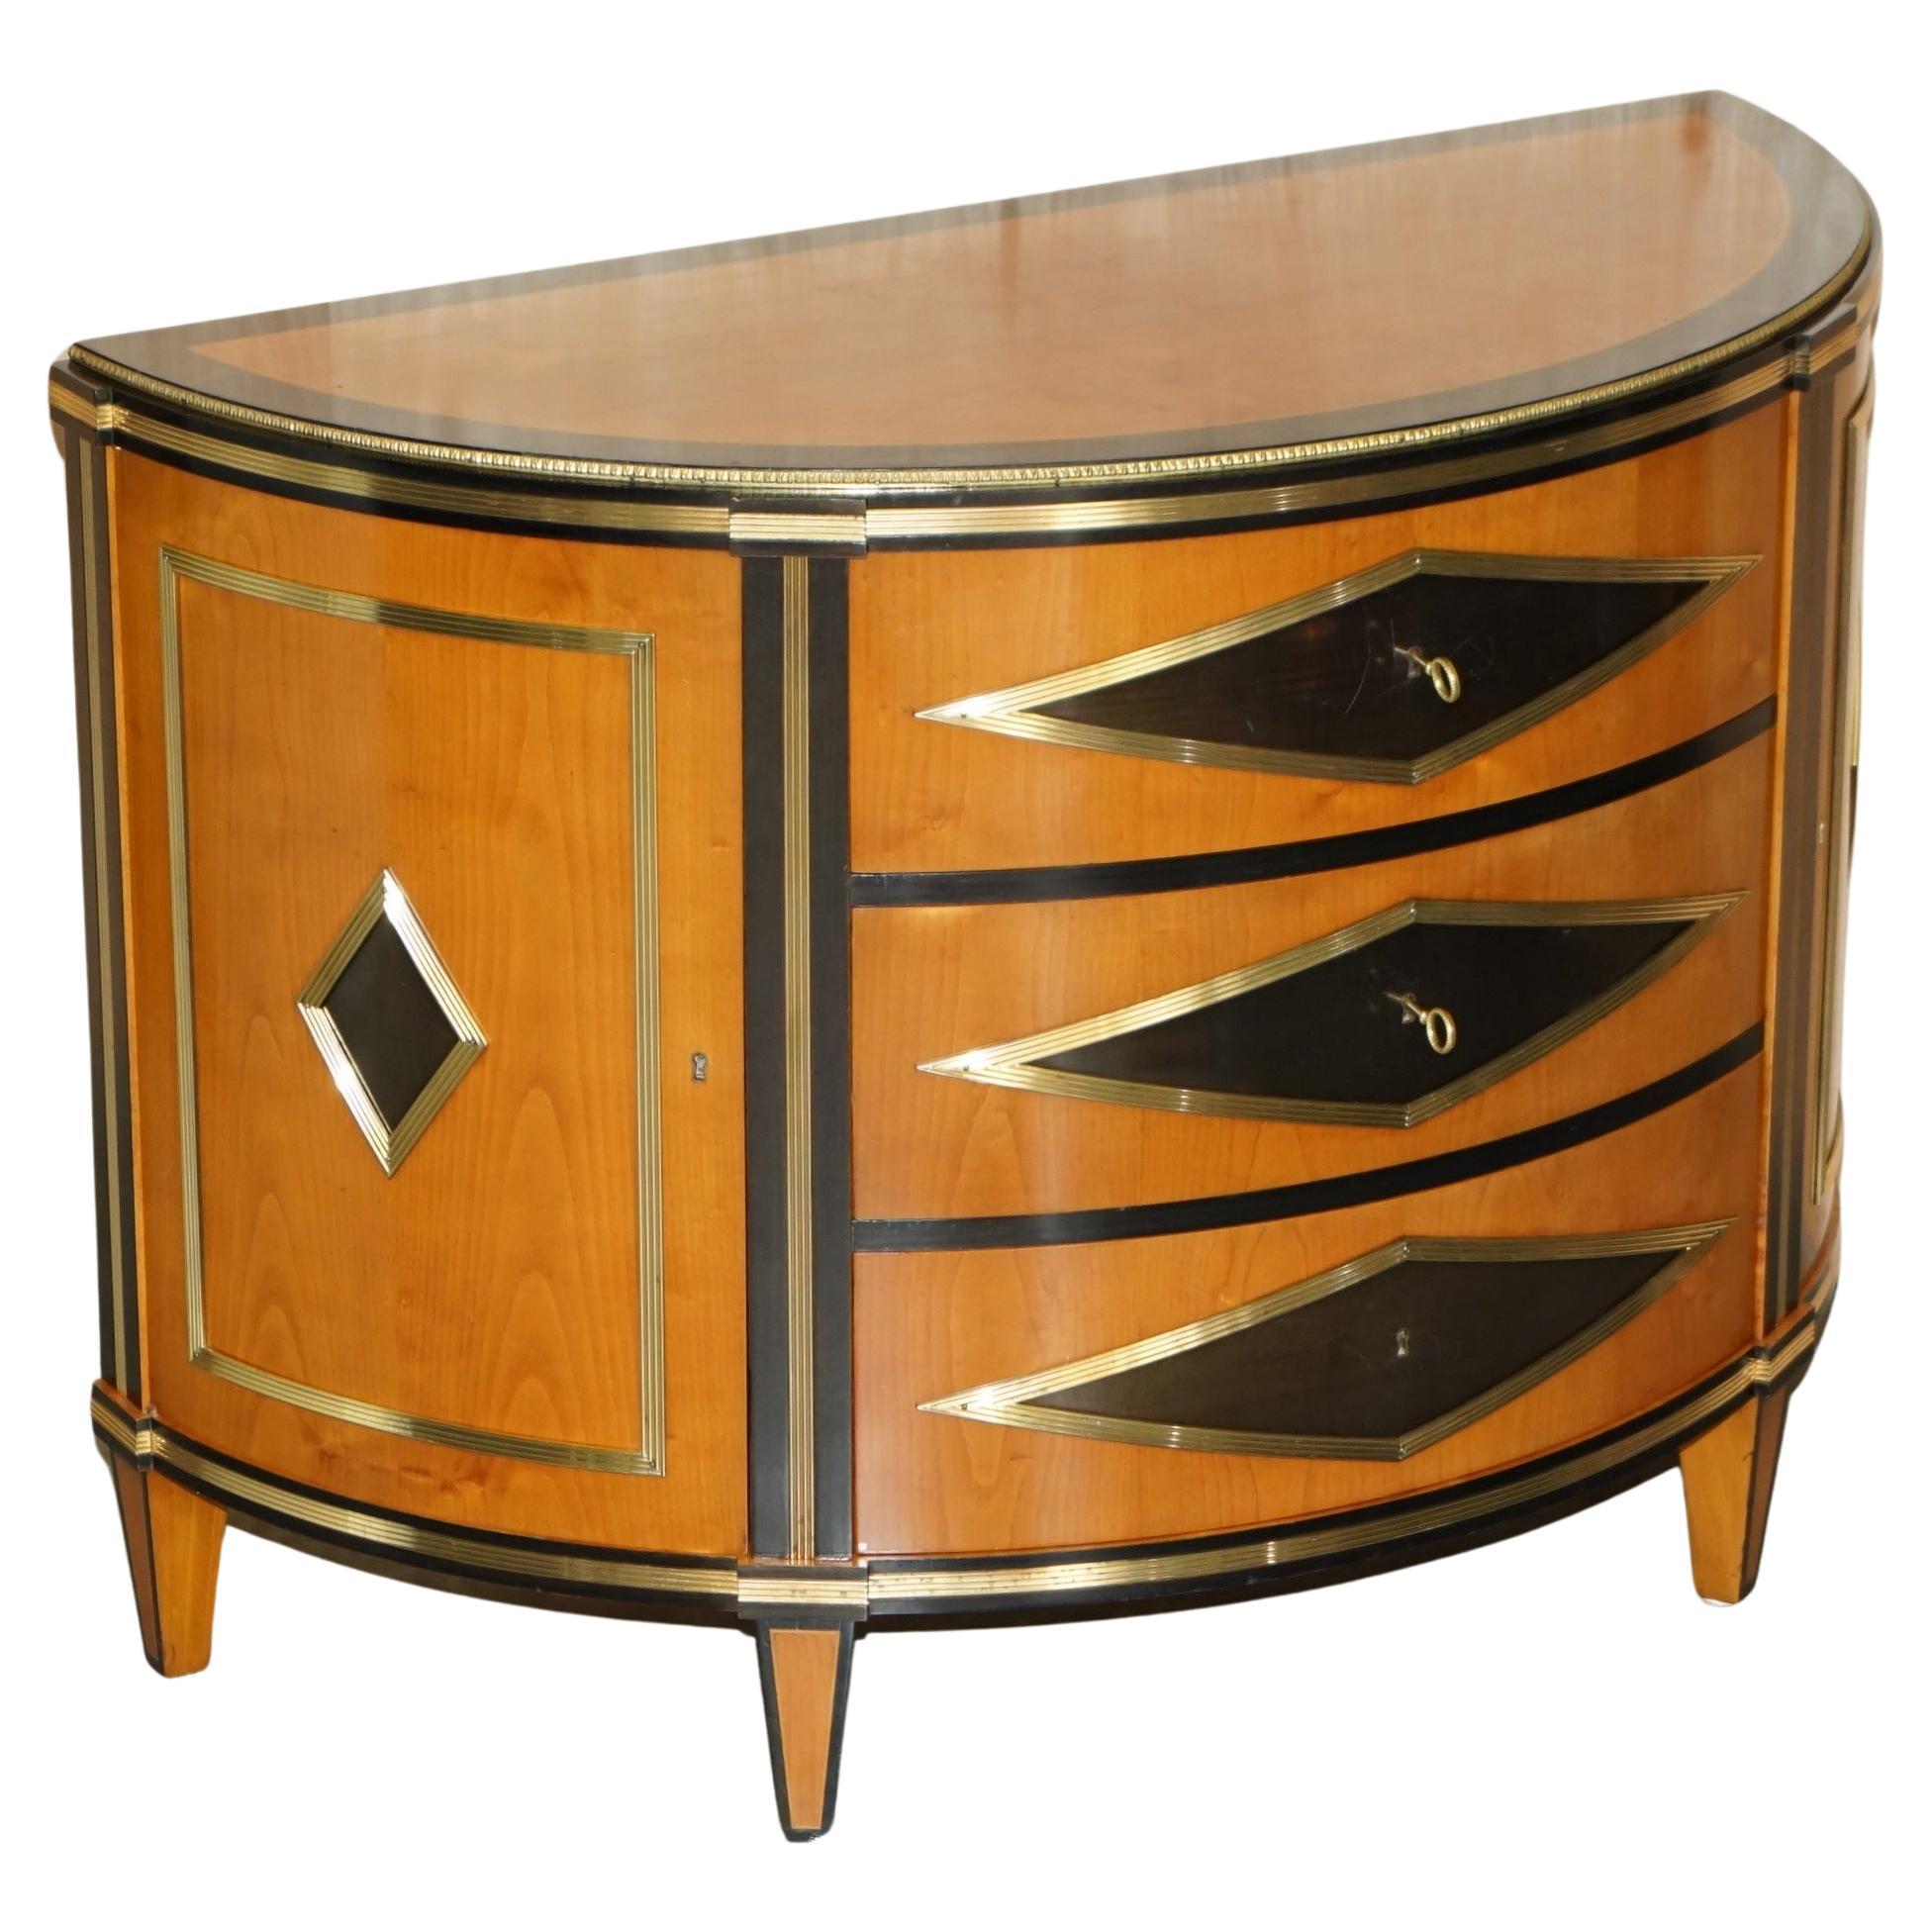 SATINWOOD & BRASS COLOMBO MOBILI ITALY DEMI LUNE SiDEBOARD CHEST OF DRAWERS For Sale